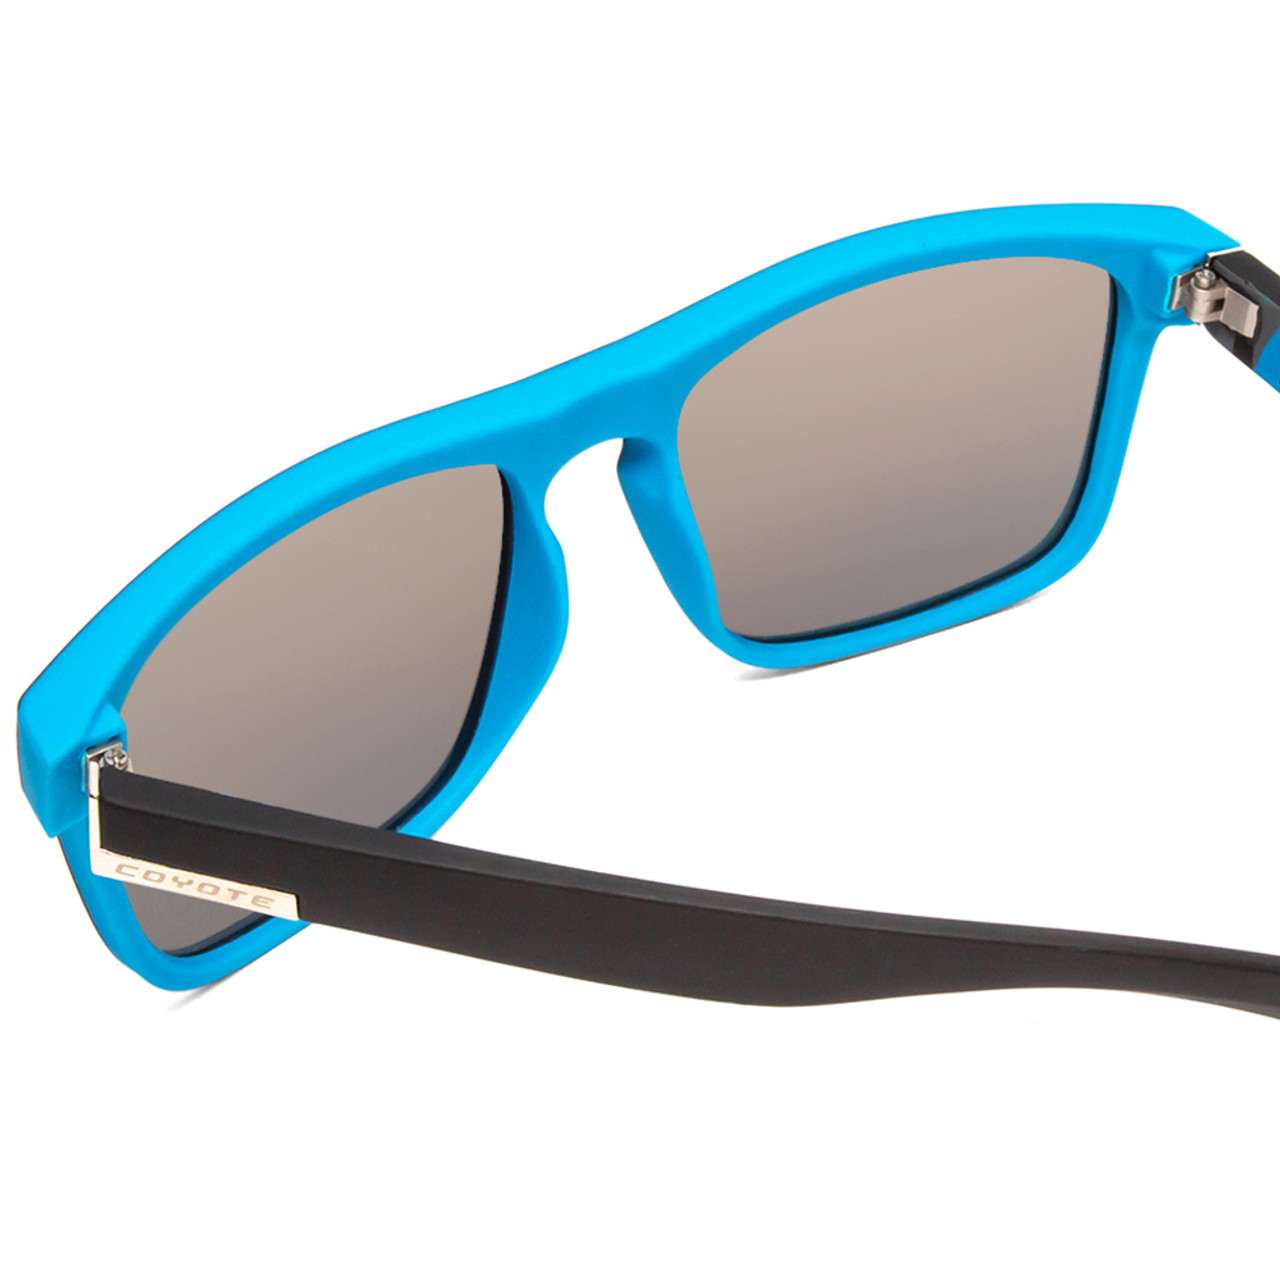 Close Up View of Coyote Marco Unisex Square Polarized Sunglasses Black Grey/Ice Blue Mirror 53 mm